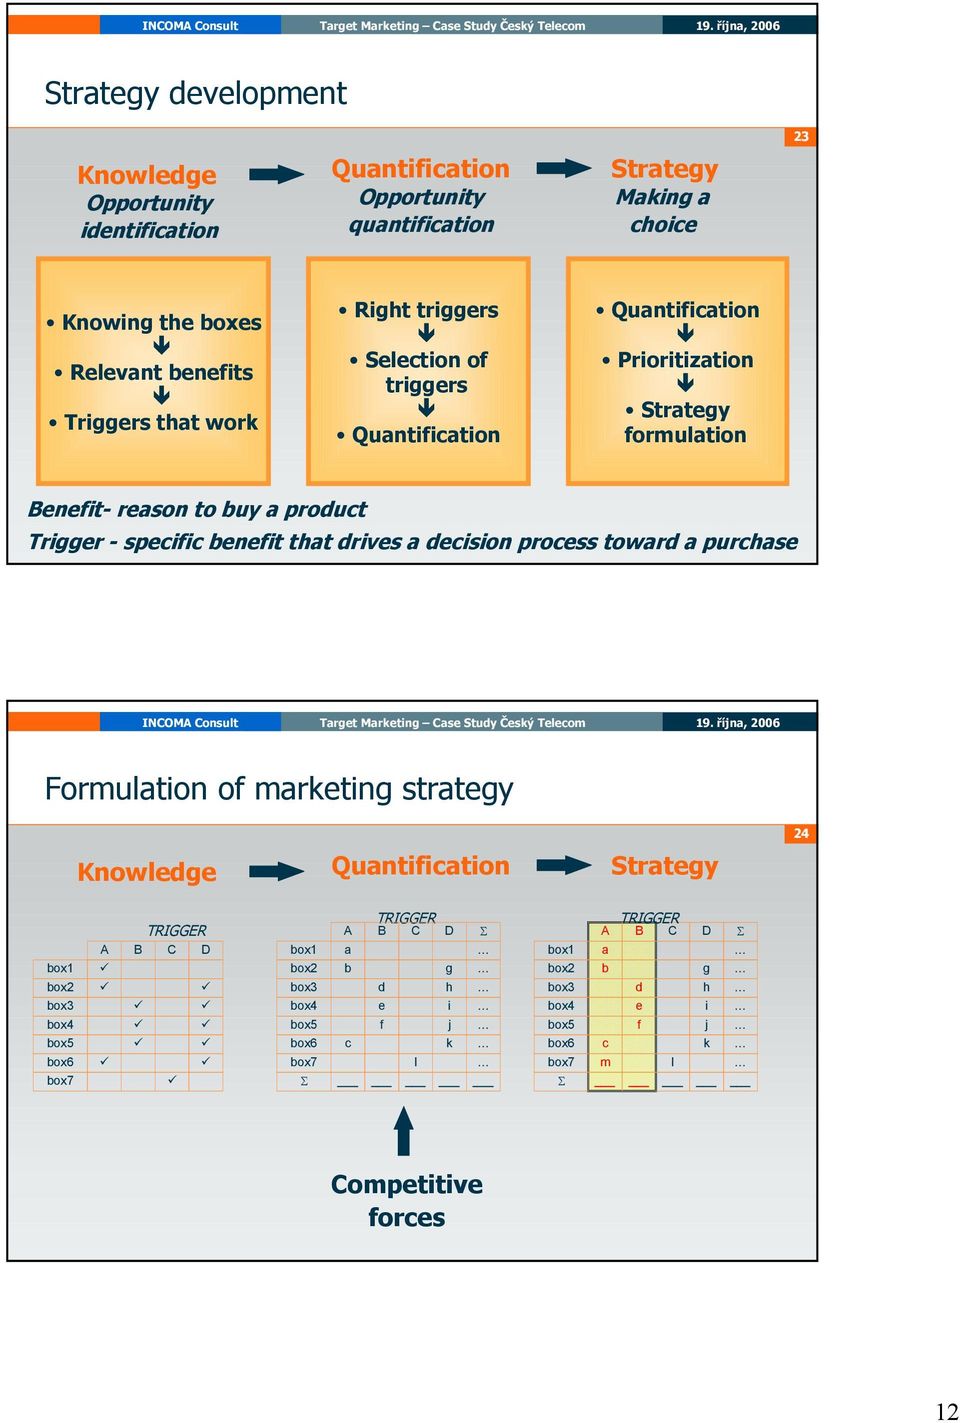 benefit that drives a decision process toward a purchase Formulation of marketing strategy nowledge Quantification Strategy 24 box1 box2 box3 box4 box5 box6 box7 A TRGGER